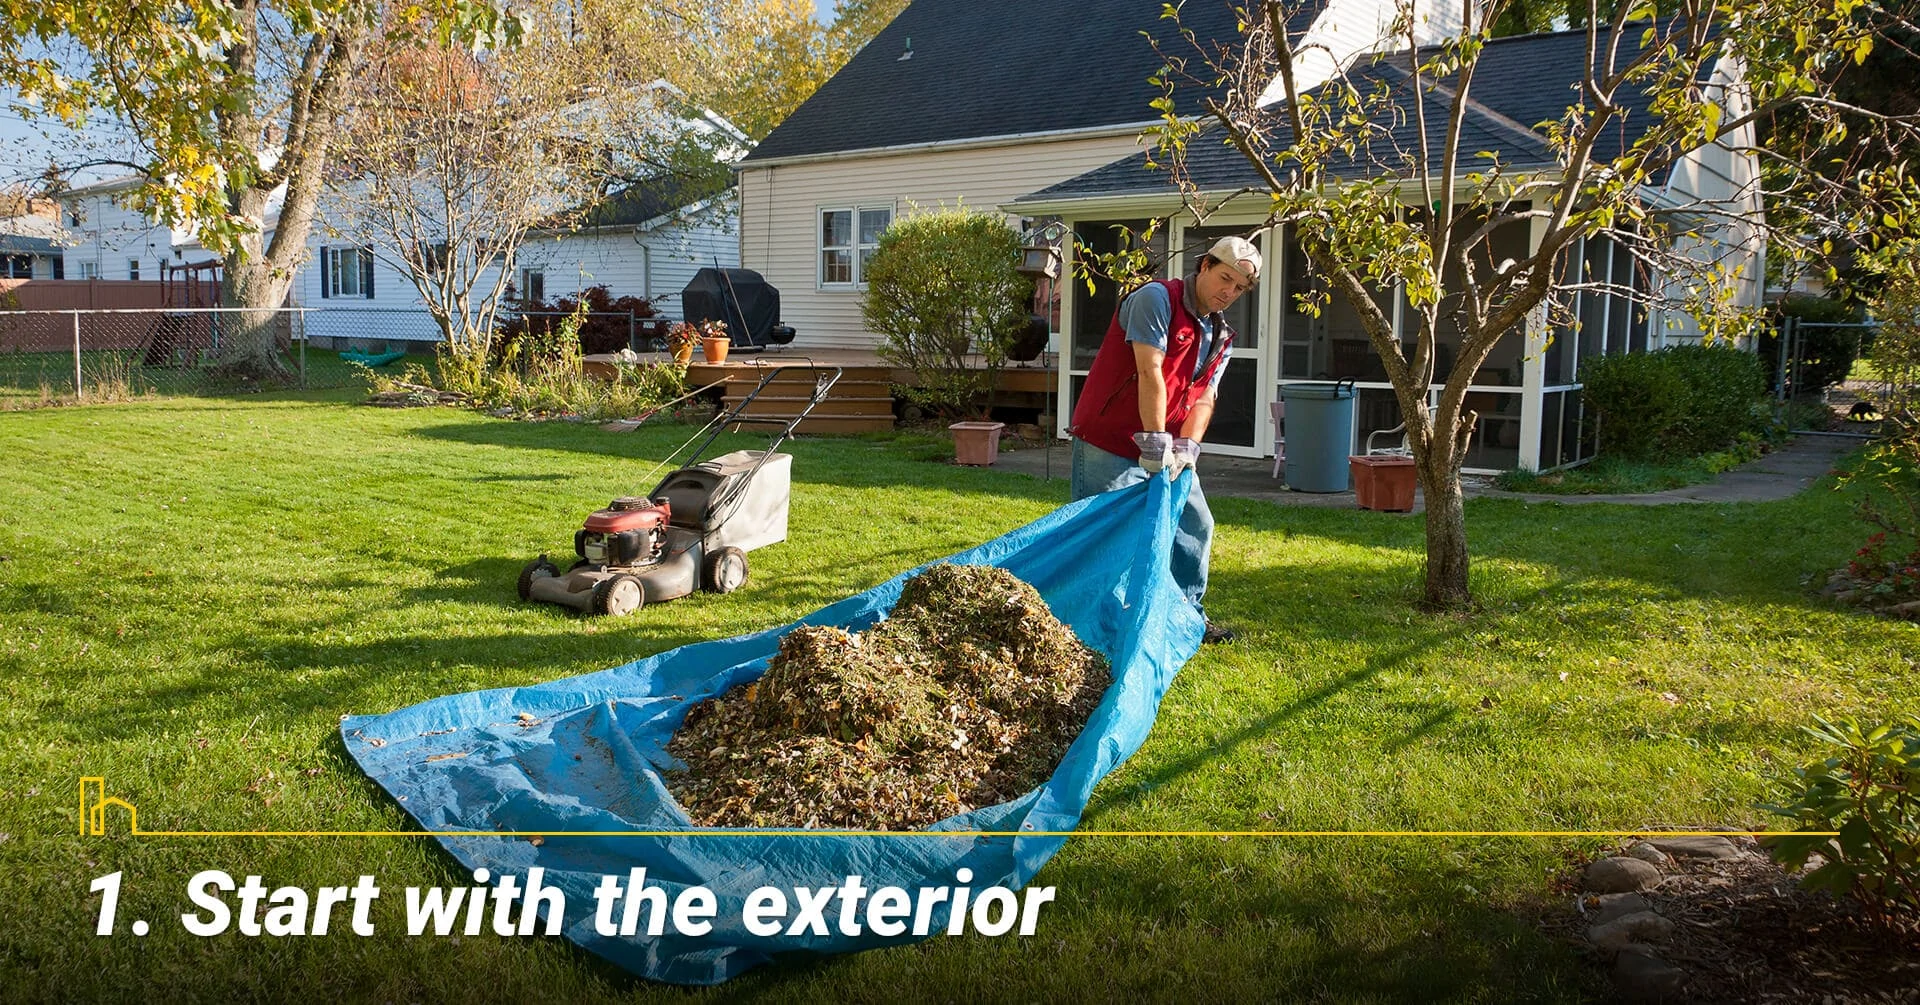 Start with the exterior, keep the exterior clean